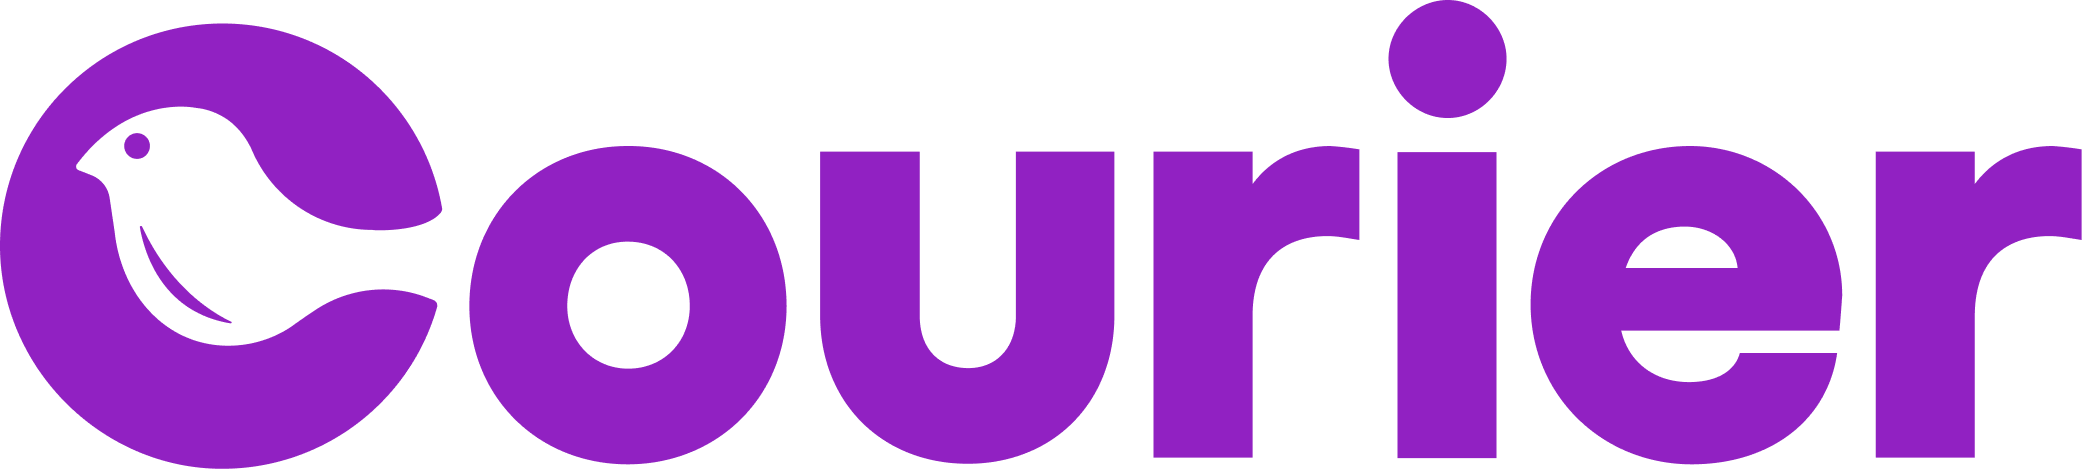 logo of Courier